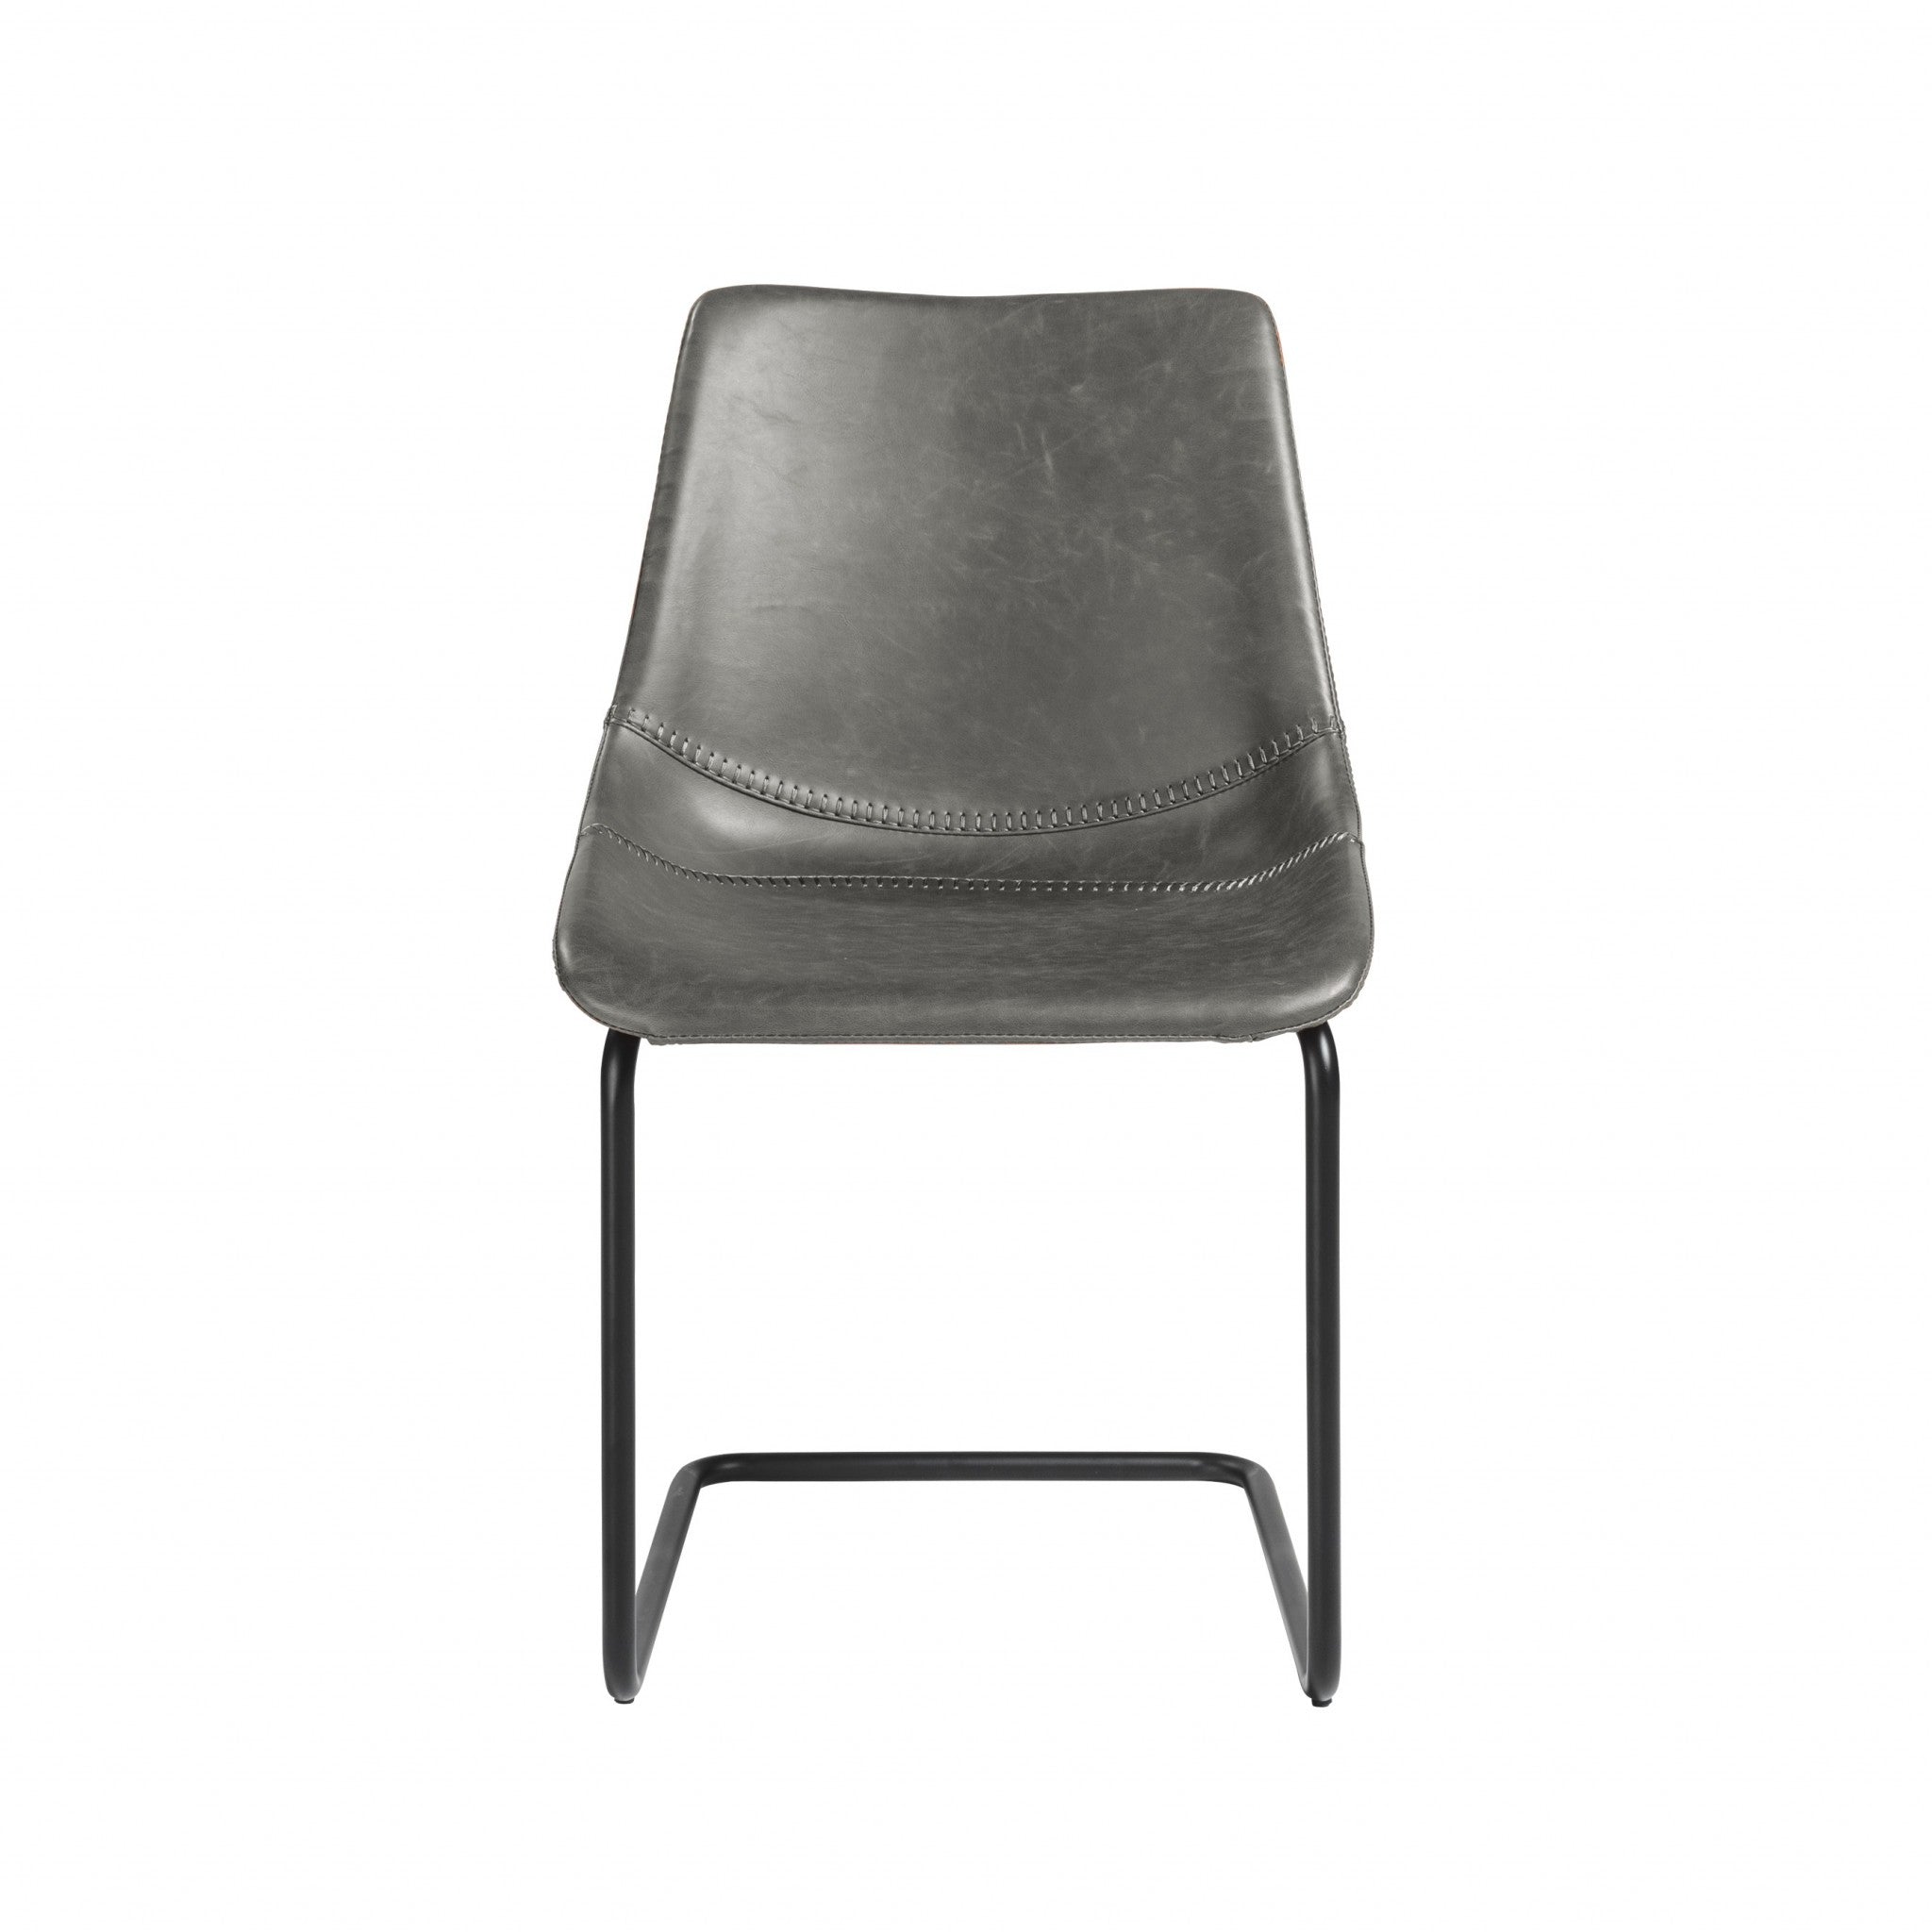 Set of Two Gray Faux Faux Leather Black Cantilever Chairs